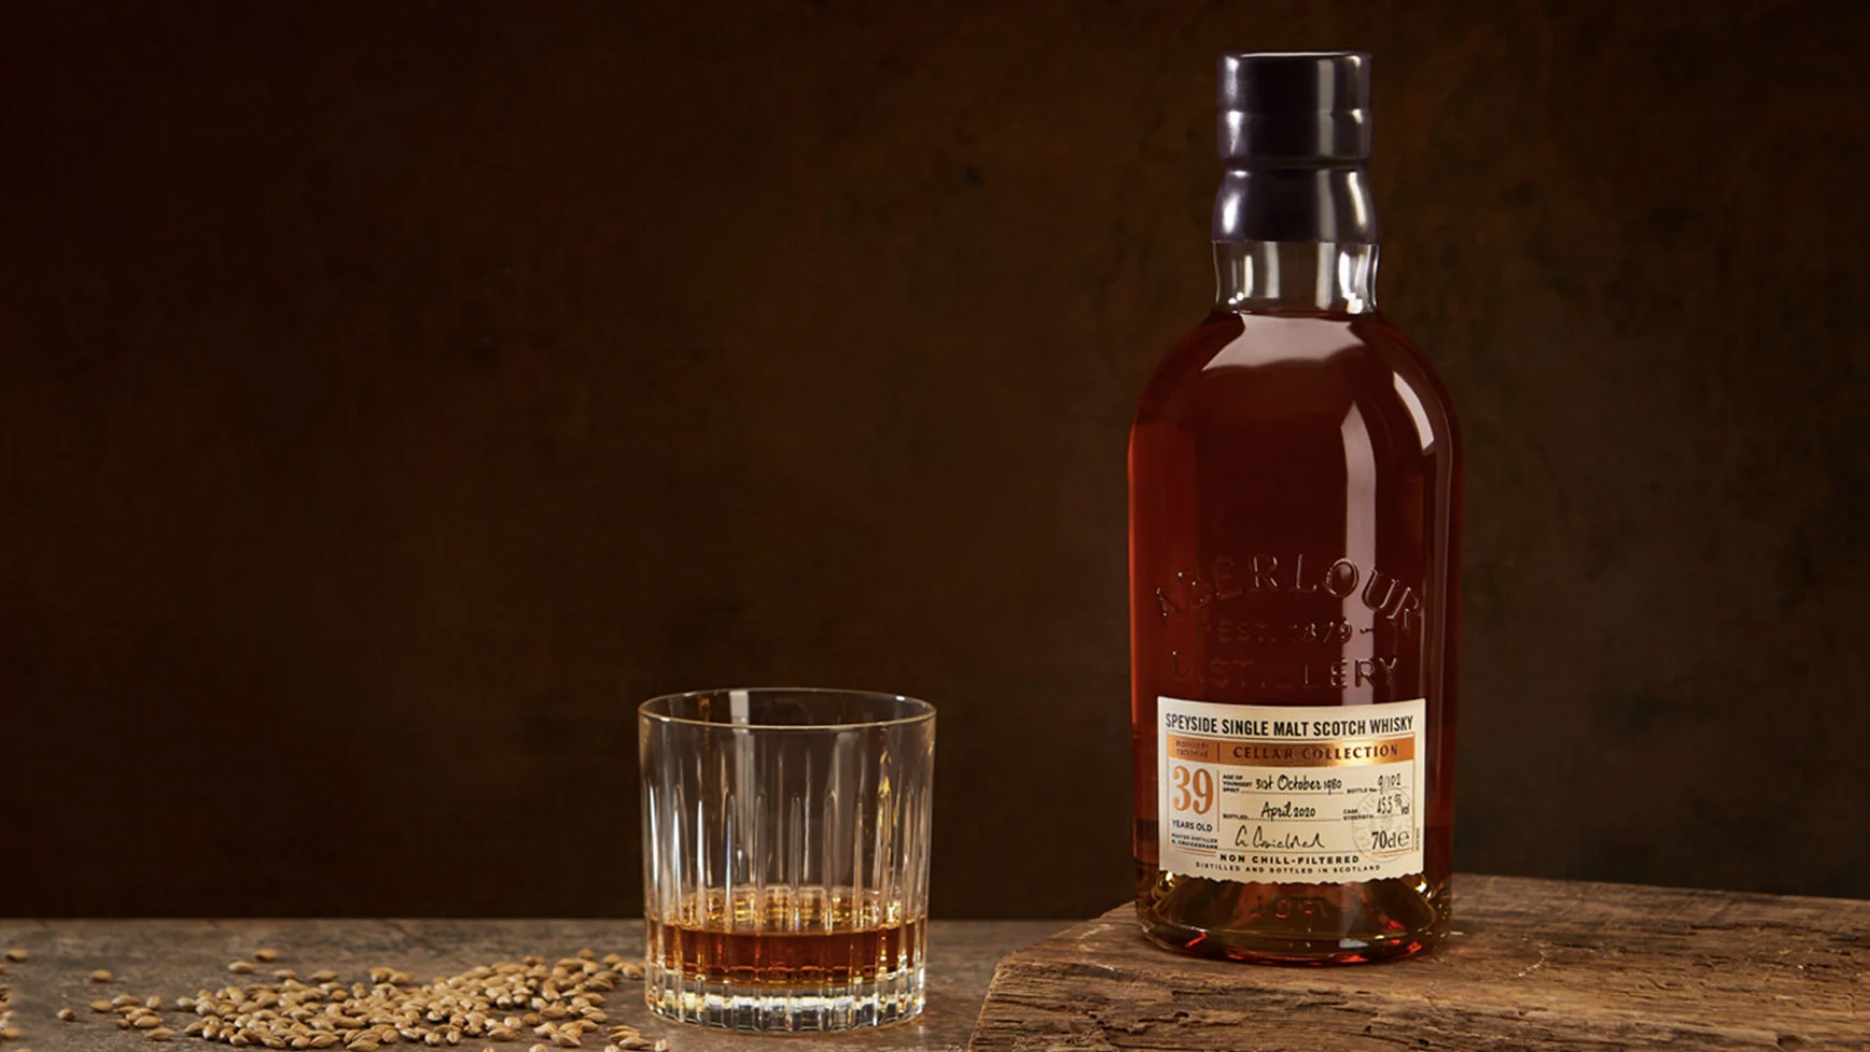 Aberlour Is Releasing Just 39 Bottles Of One Of Its Oldest Whiskies